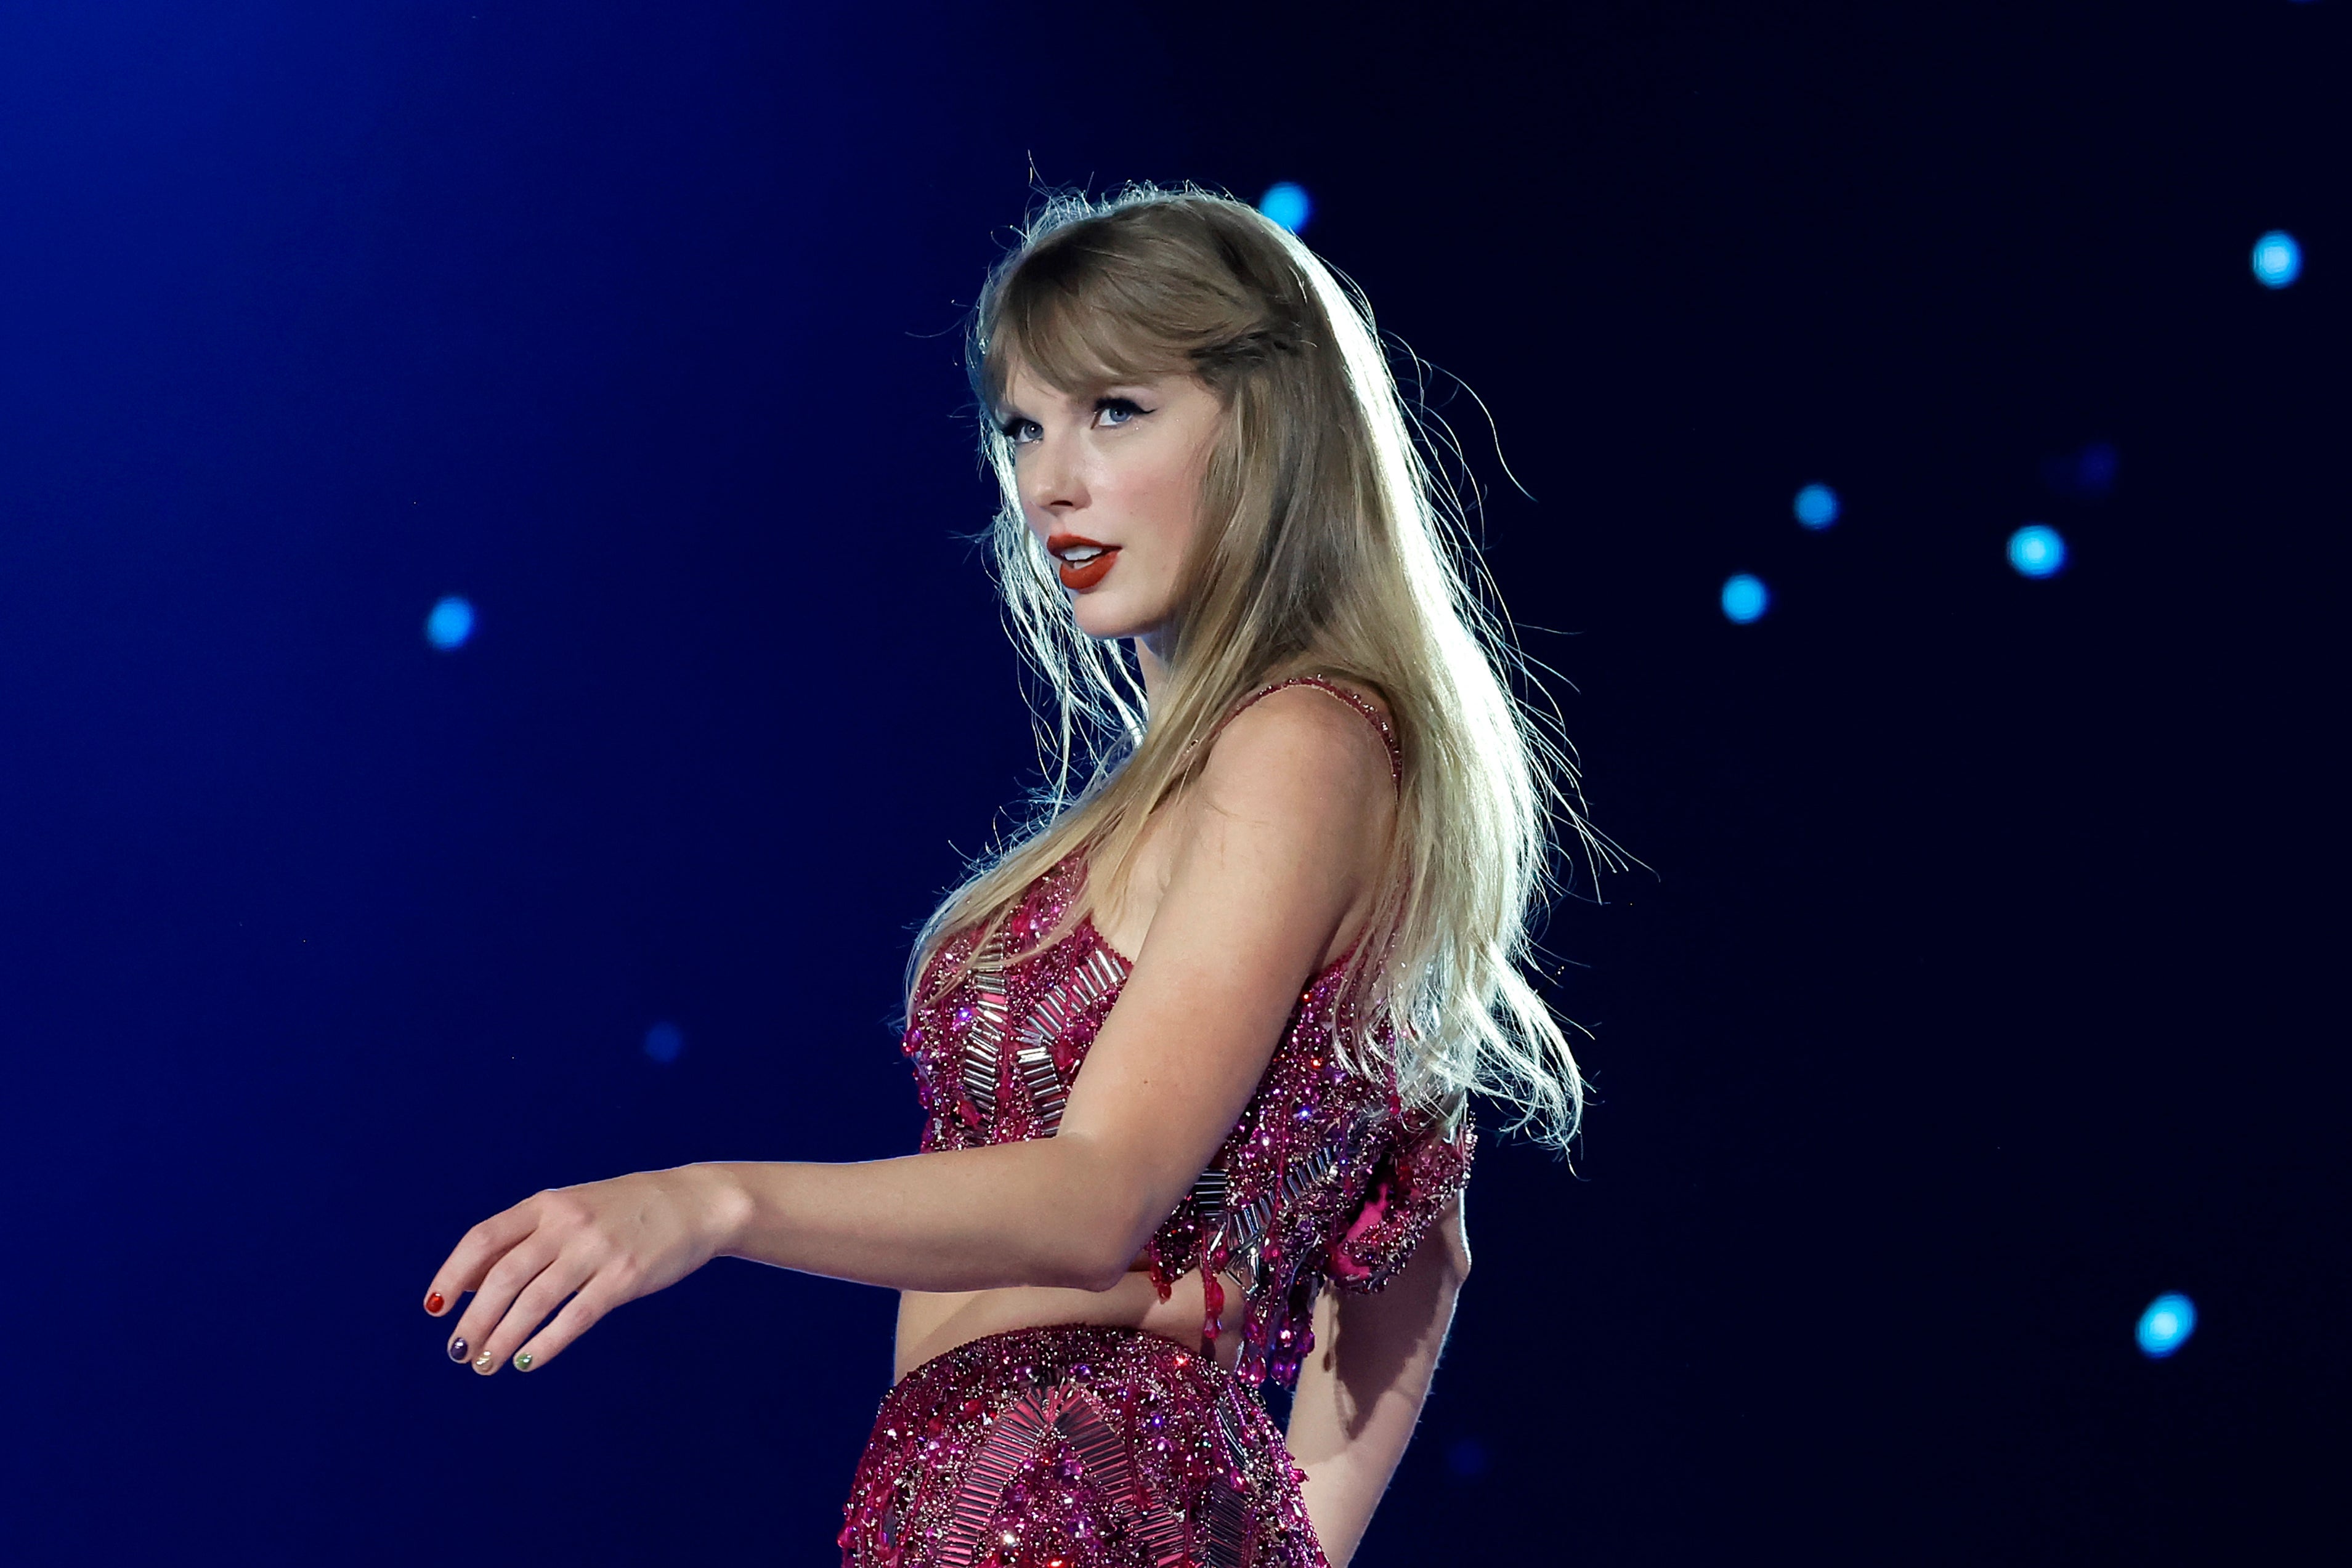 US pop star Taylor Swift named Time magazine person of the year